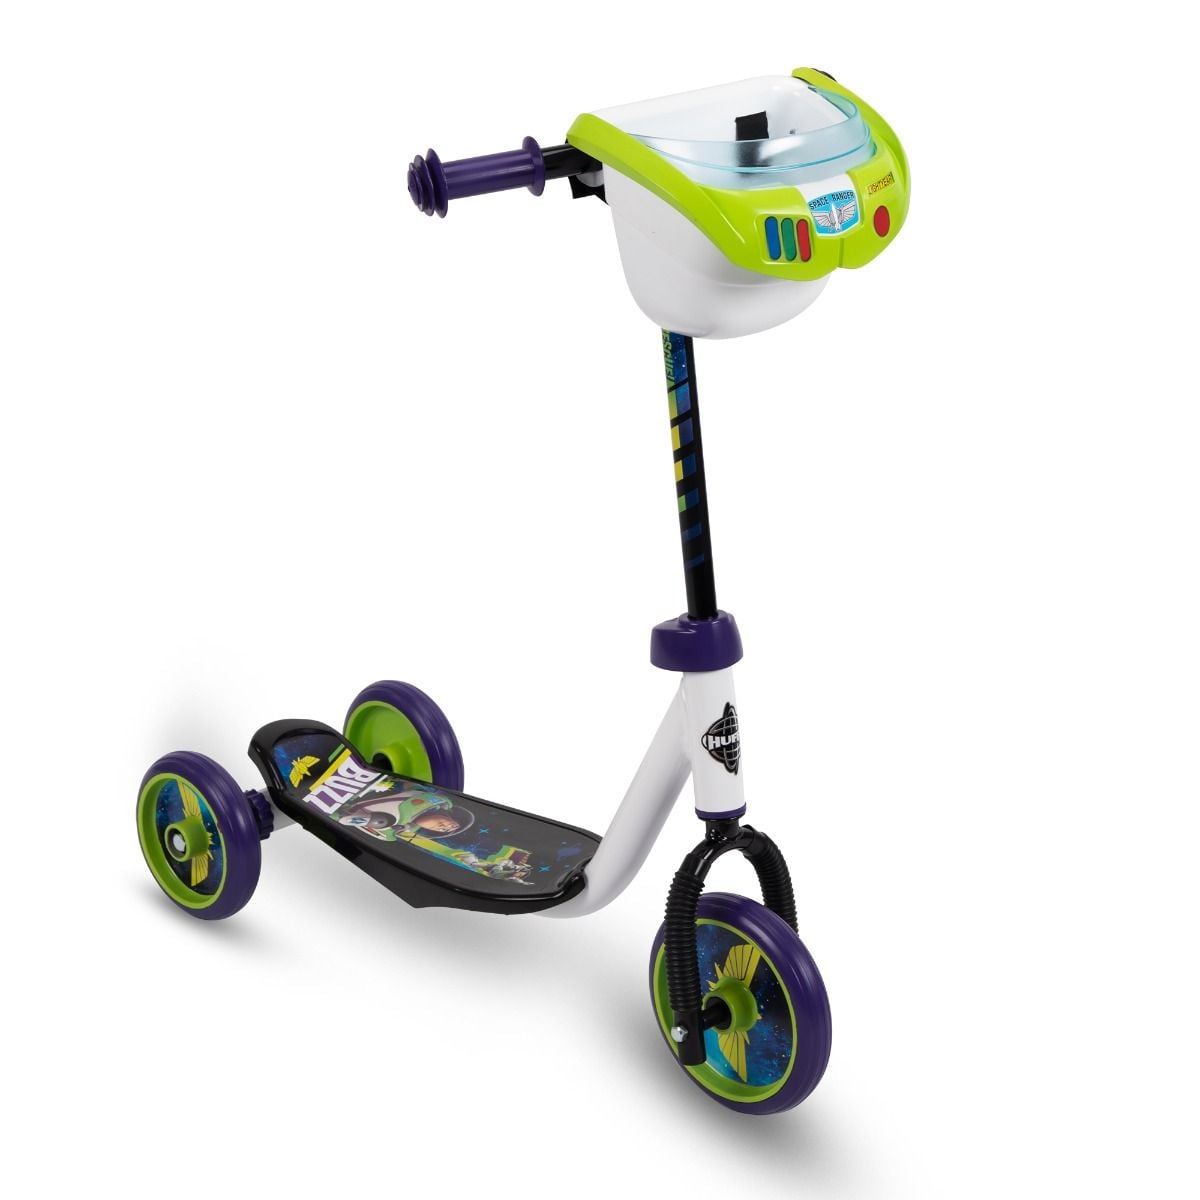 Huffy Huffy Story Kids Toddler Preschool 3 Wheel Ride On Kick Scooter Basket at Lowes.com